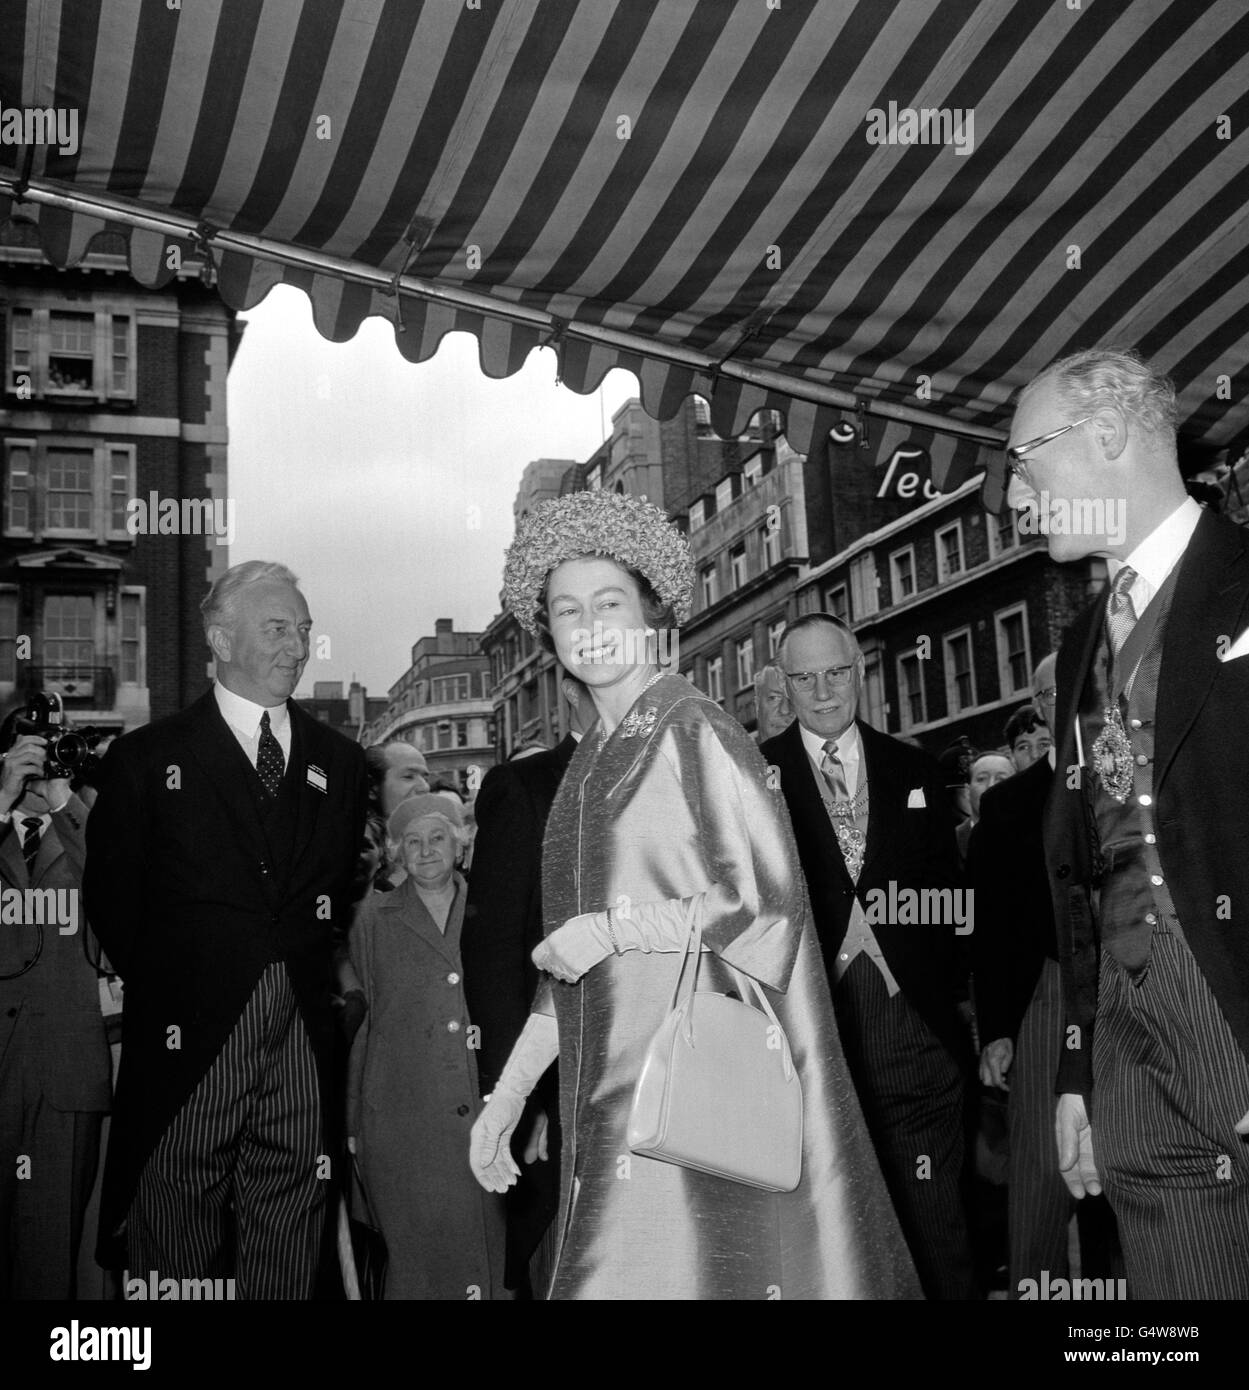 Queen Elizabeth II arrives at Fishmongers' Hall in the City of London to open the Congress of the Federation of Commonwealth and British Chambers of Commerce. Stock Photo